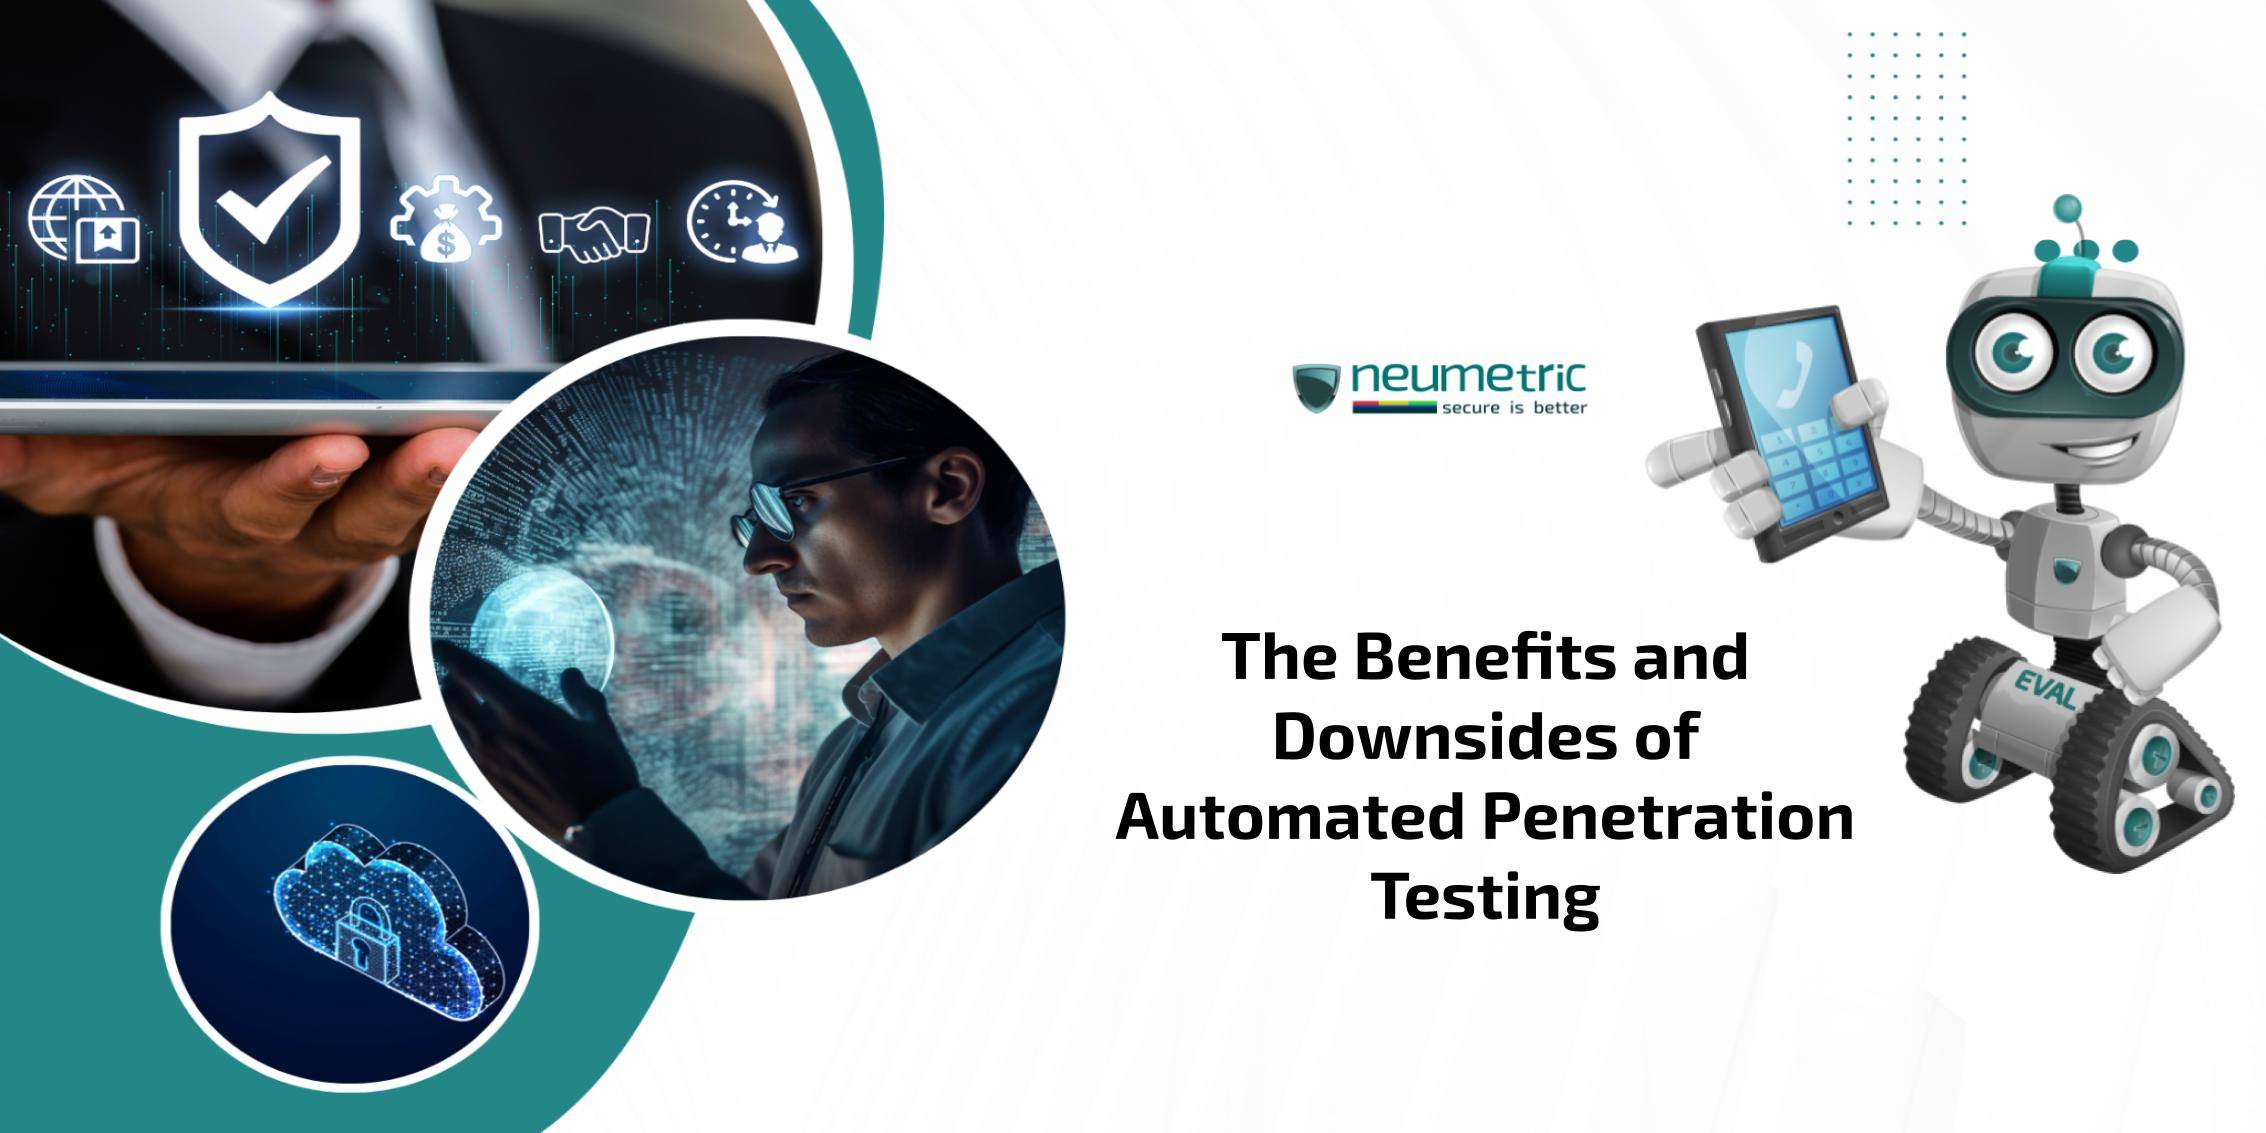 The Benefits and Downsides of Automated Penetration Testing